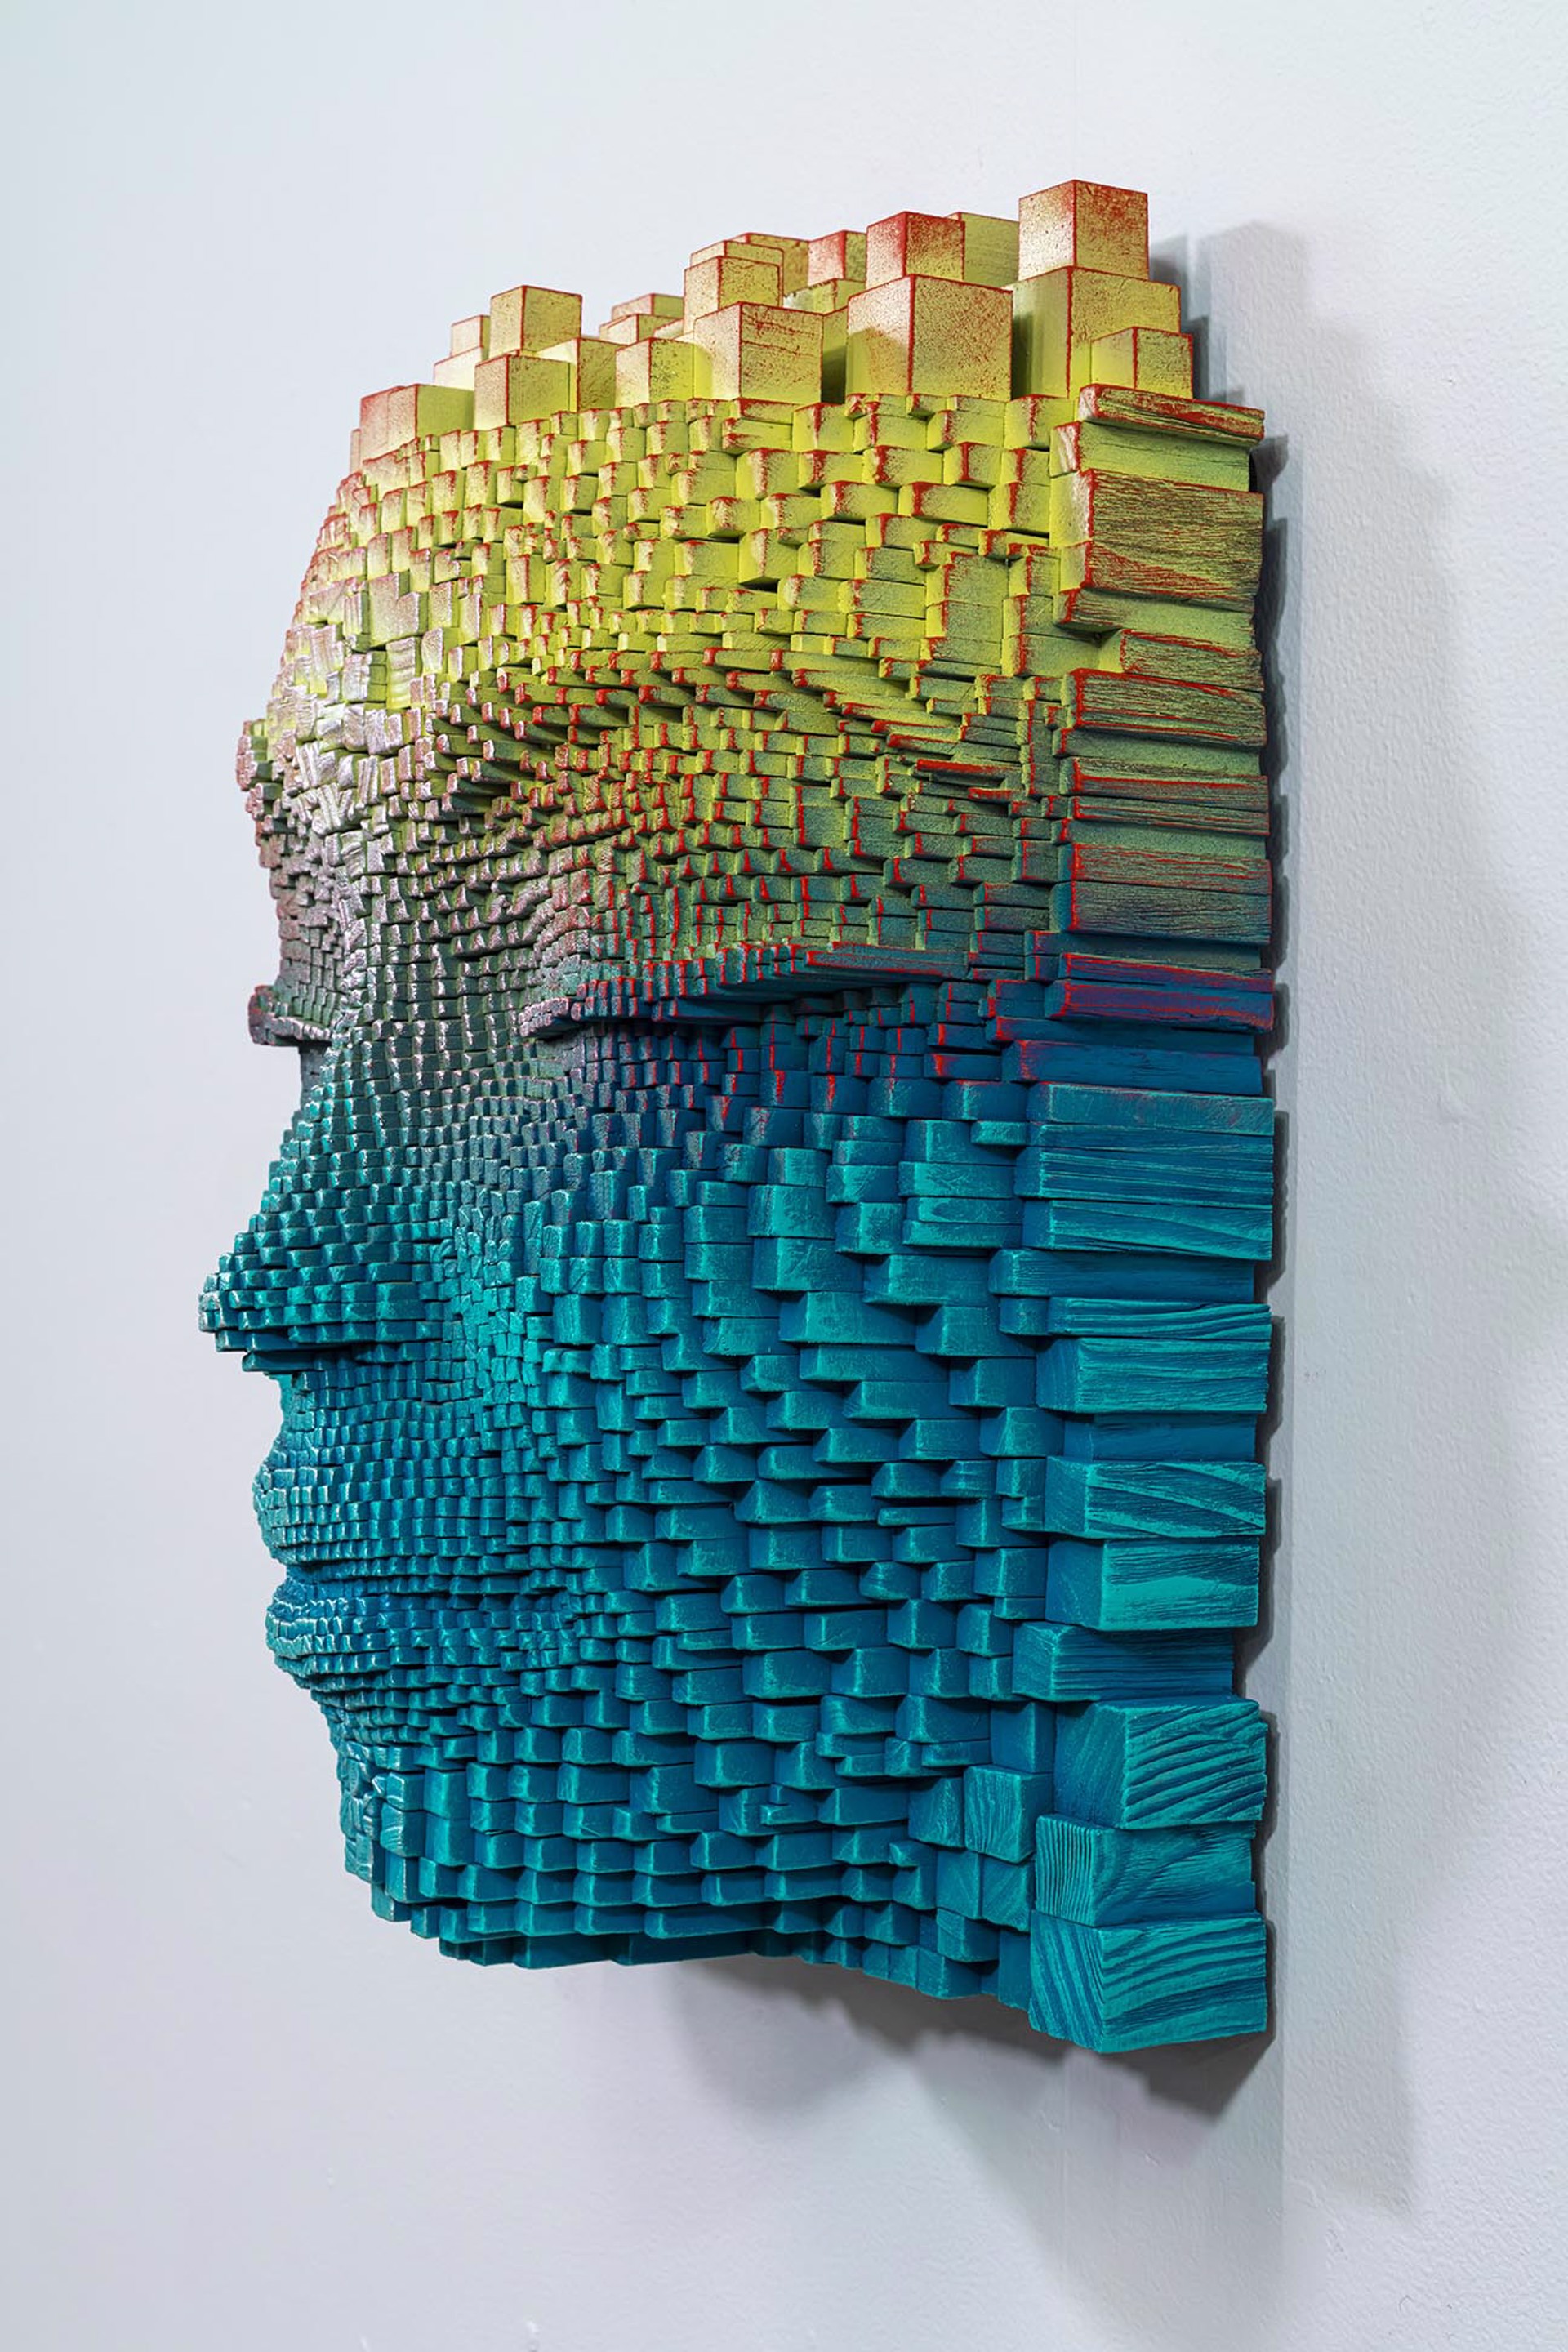 Mask #257 by Gil Bruvel